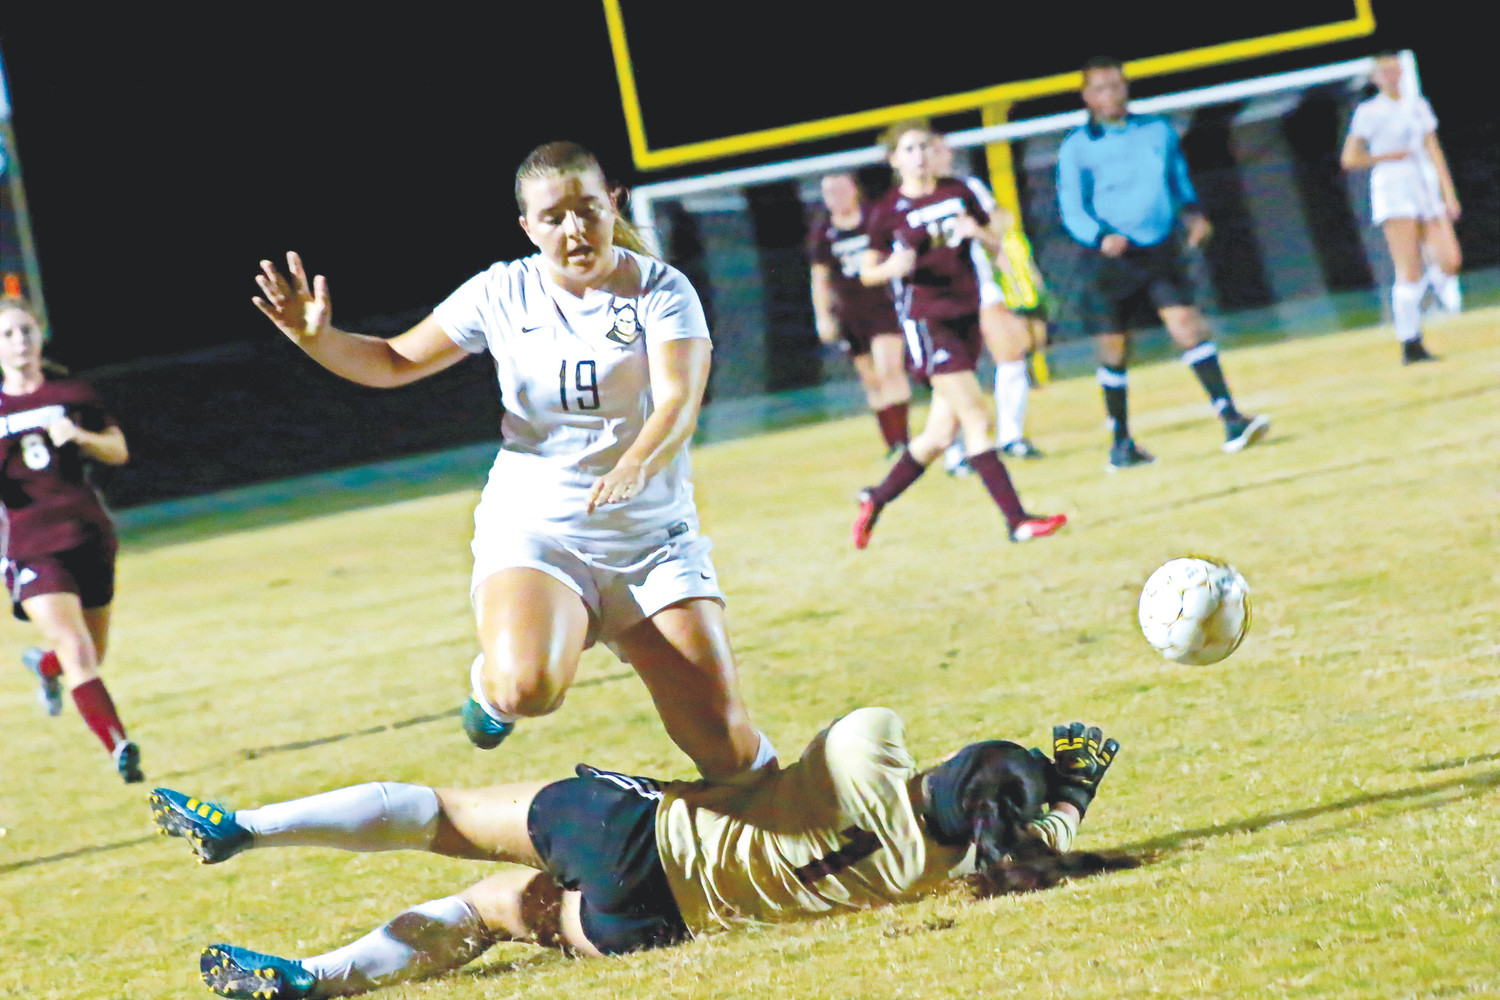 Oakleaf forward Micaela French barrels over St. Augustine goalie in effort for loose ball. French scored a goal in first half of Knights’ 9-1 district season opener on Nov. 6.